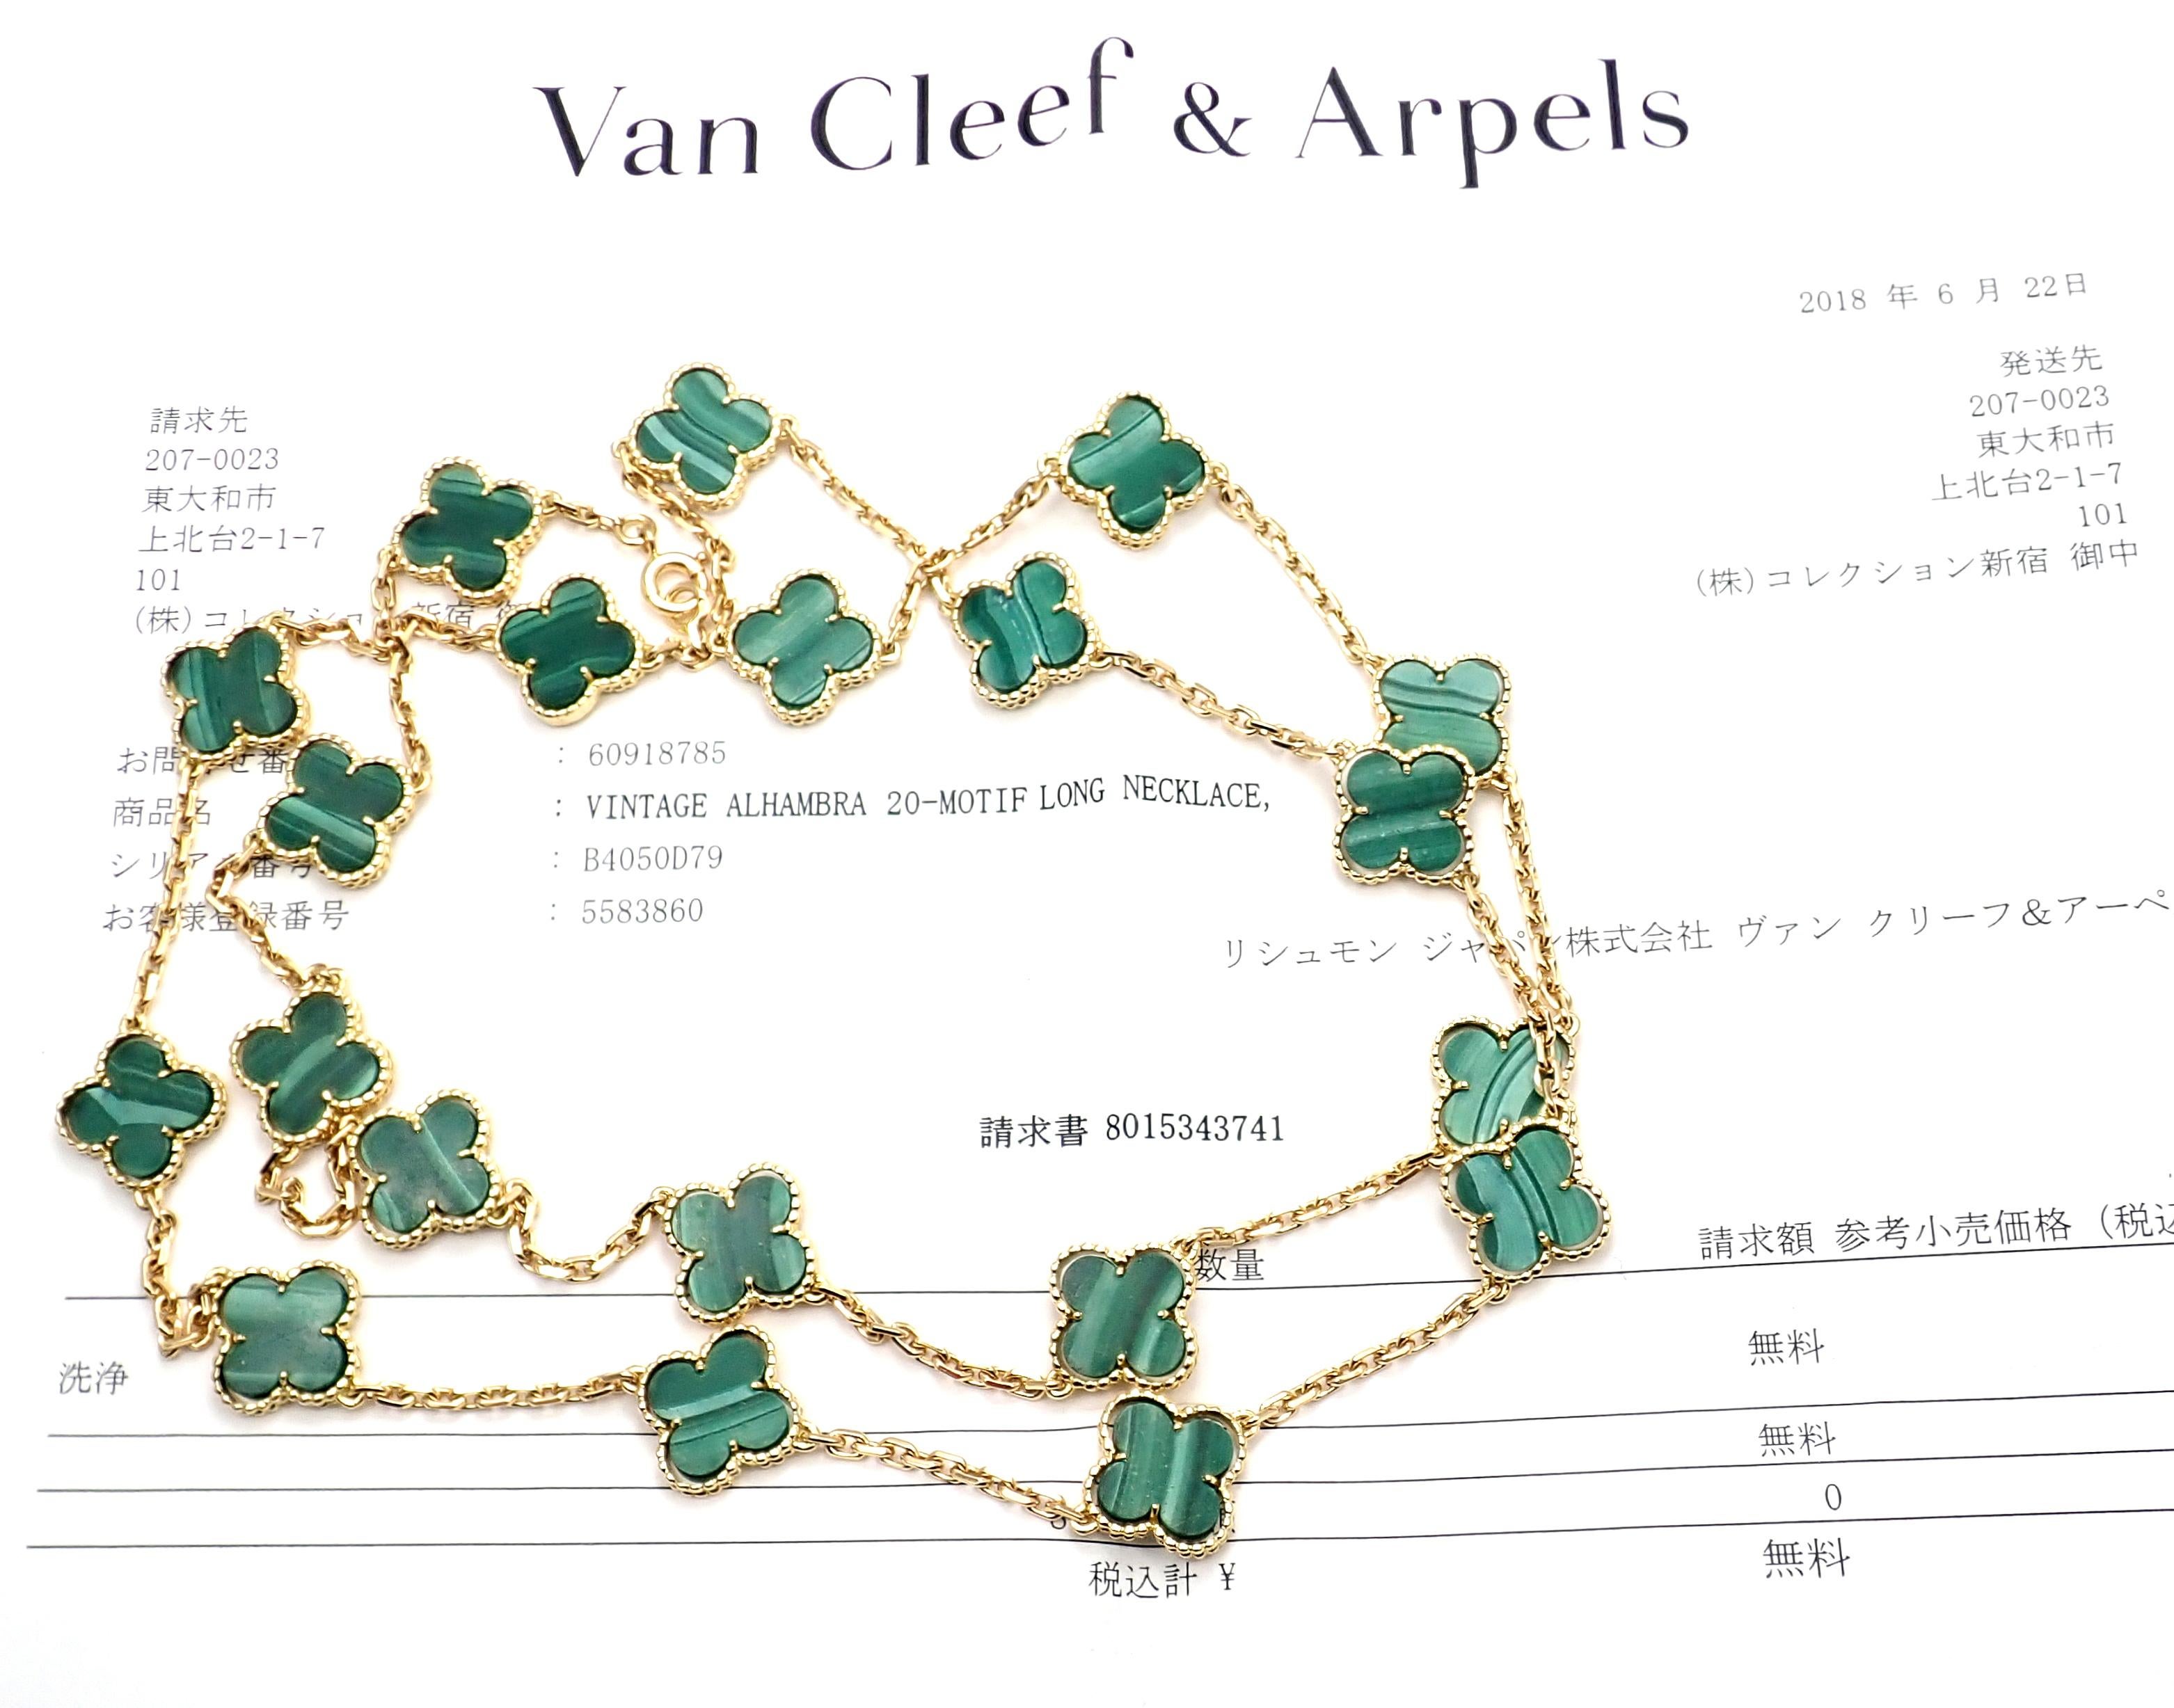 18k Yellow Gold Alhambra 20 Motifs Malachite Necklace by
Van Cleef & Arpels.
With 20 motifs of Malachite Alhambra stones 15mm each.
This necklace comes with Van Cleef & Arpels service paper from VCA store in Tokyo and a VCA box.
Details:
Length: